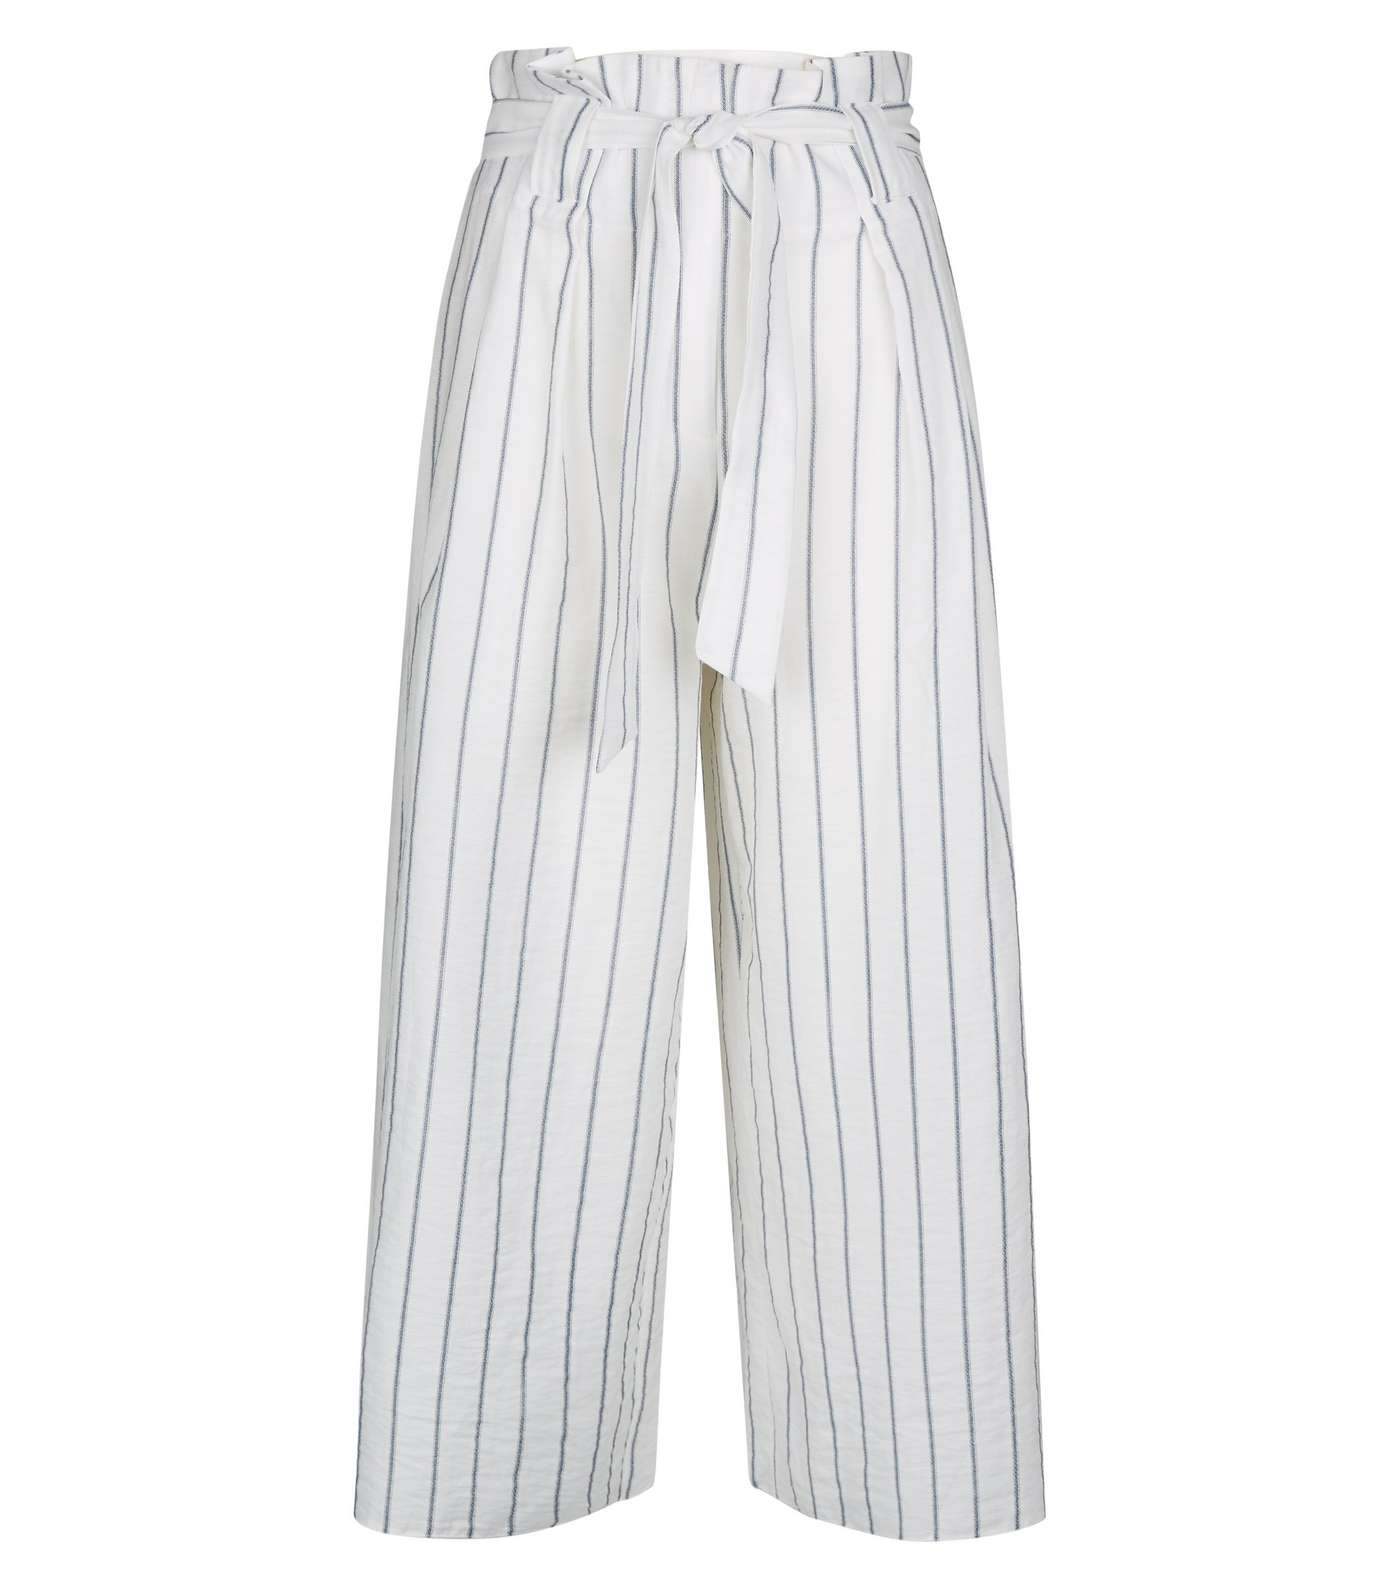 White Stripe Linen-Look Paperbag Culottes Image 4